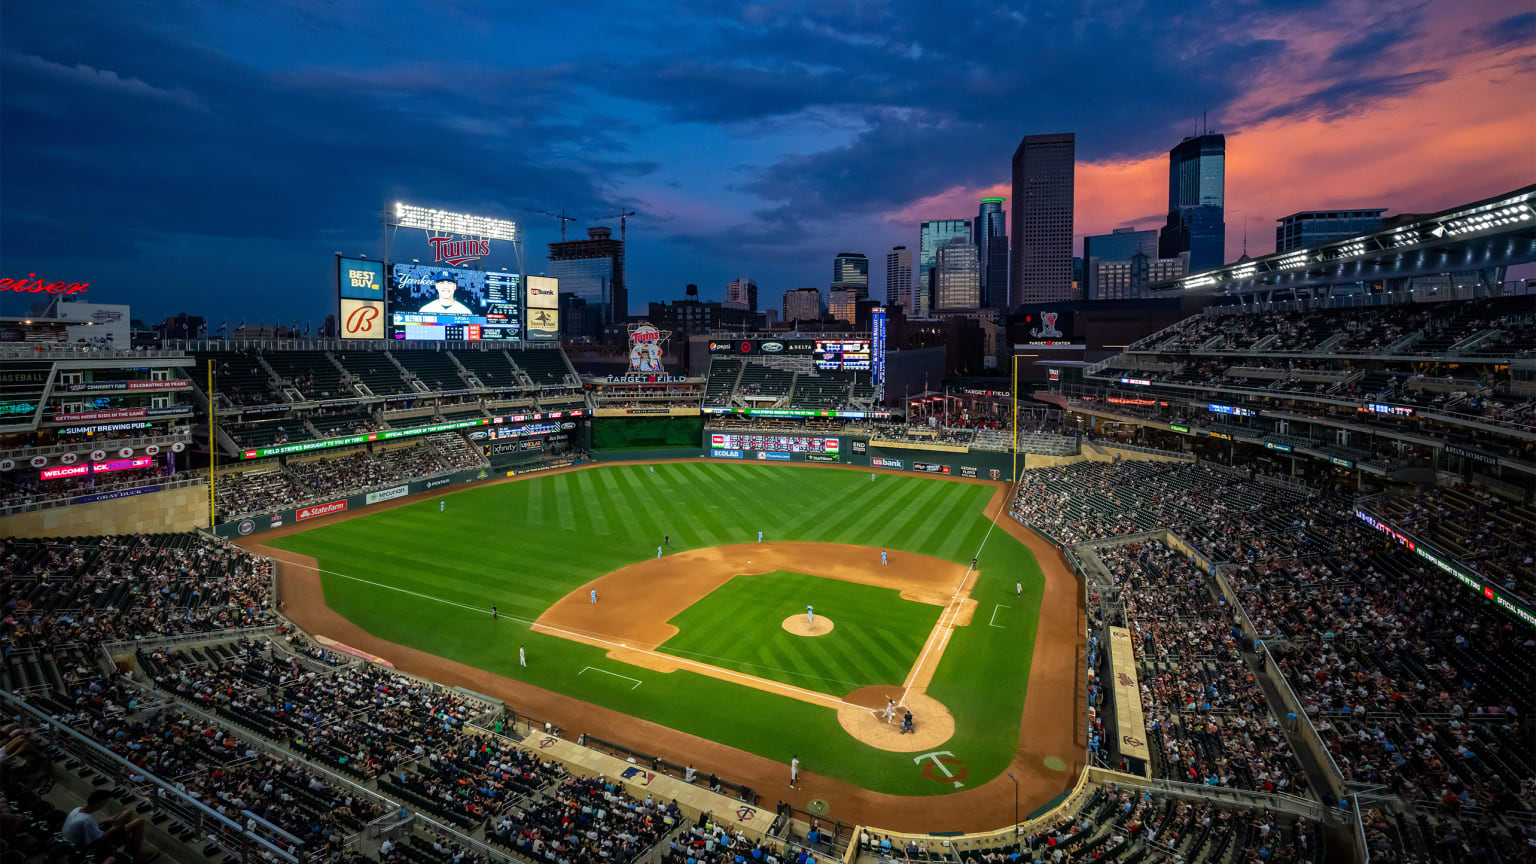 Information and details for watching a game at Target Field